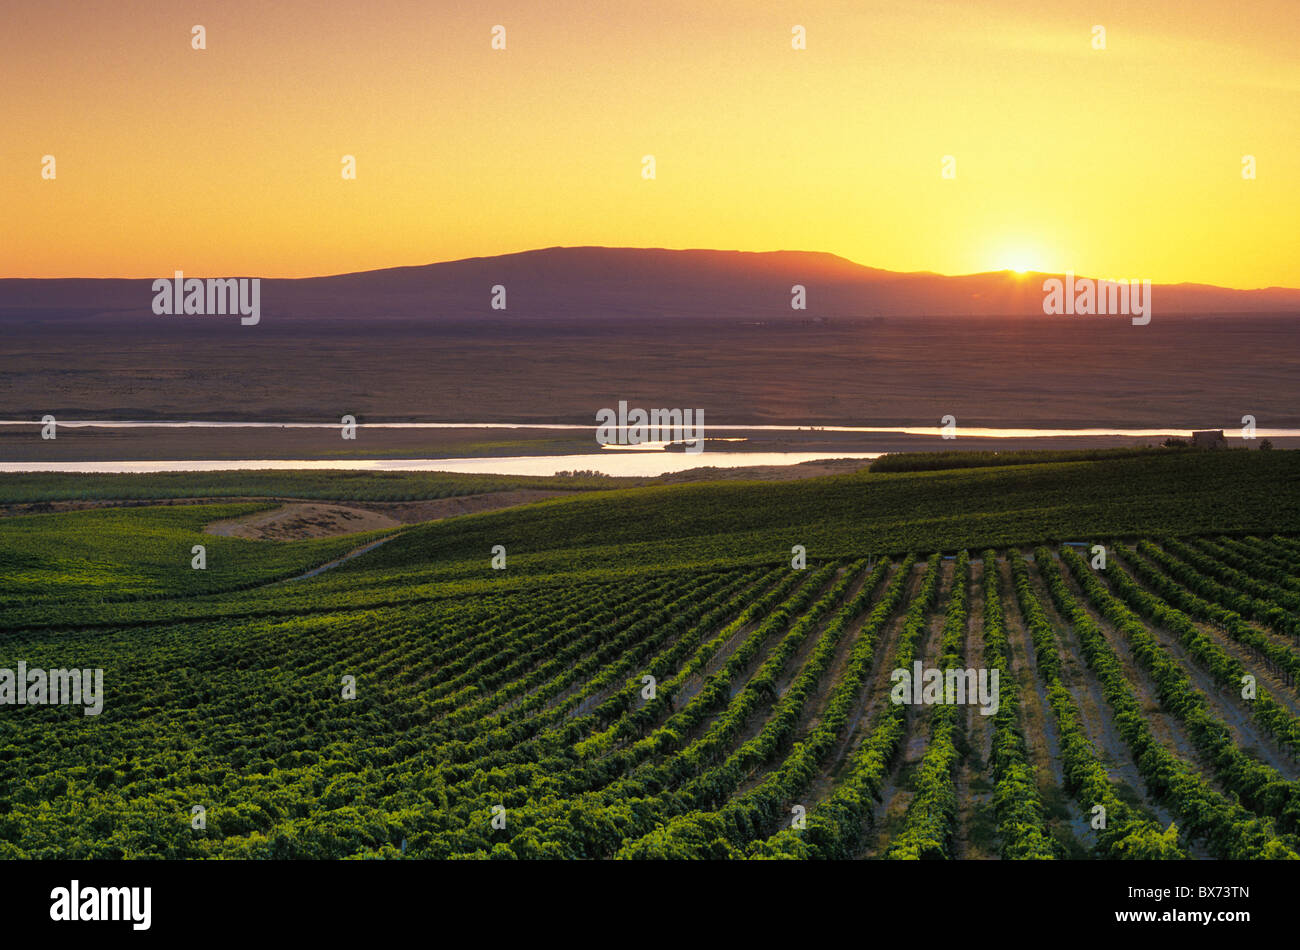 Sunset over the Columbia River, Hanford nuclear site, Rattlesnake Mountain from Sagemoor Vineyards, Columbia Valley, Washington. Stock Photo